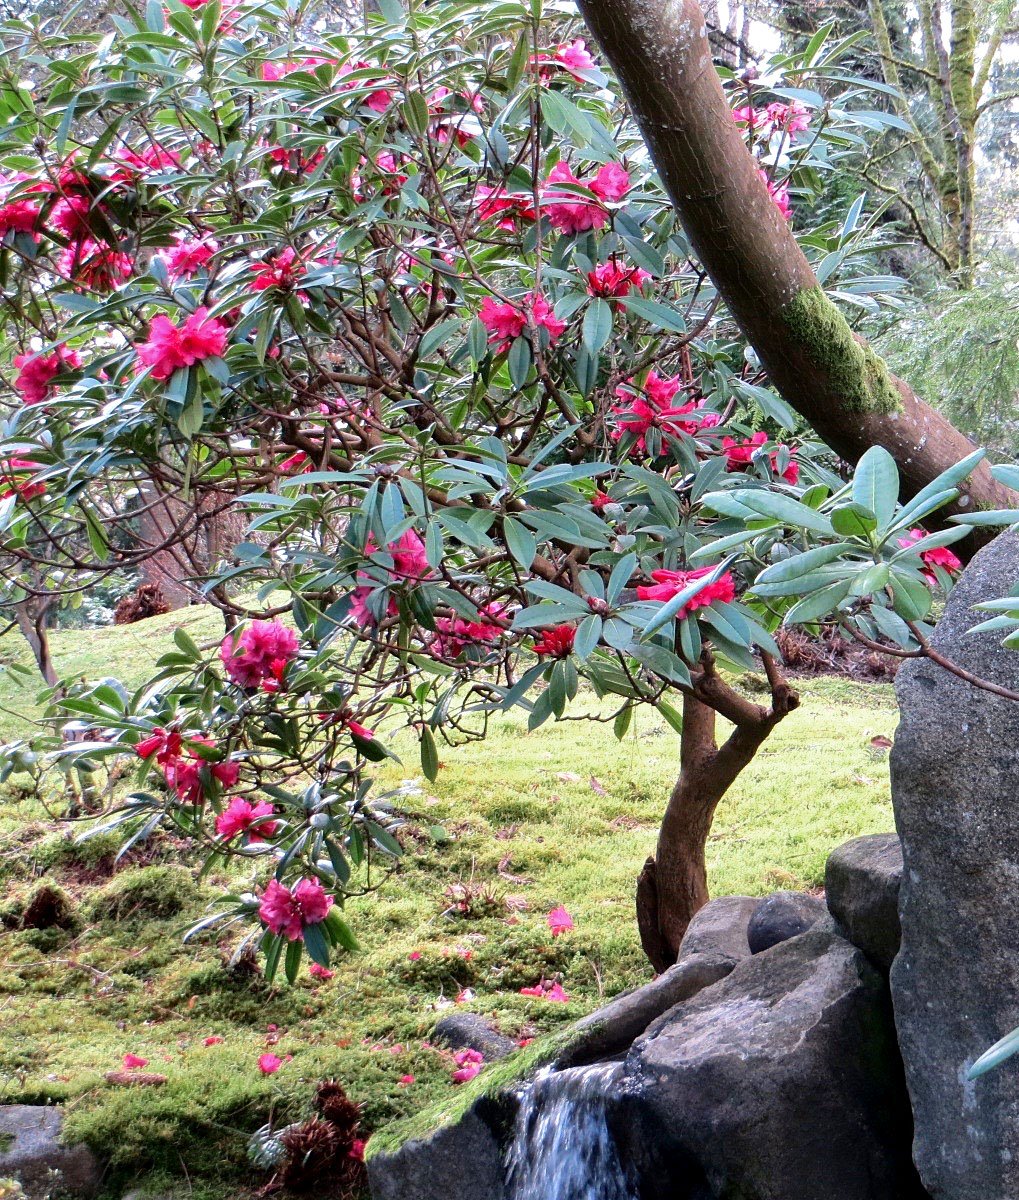 How to prune rhododendrons – for the best results